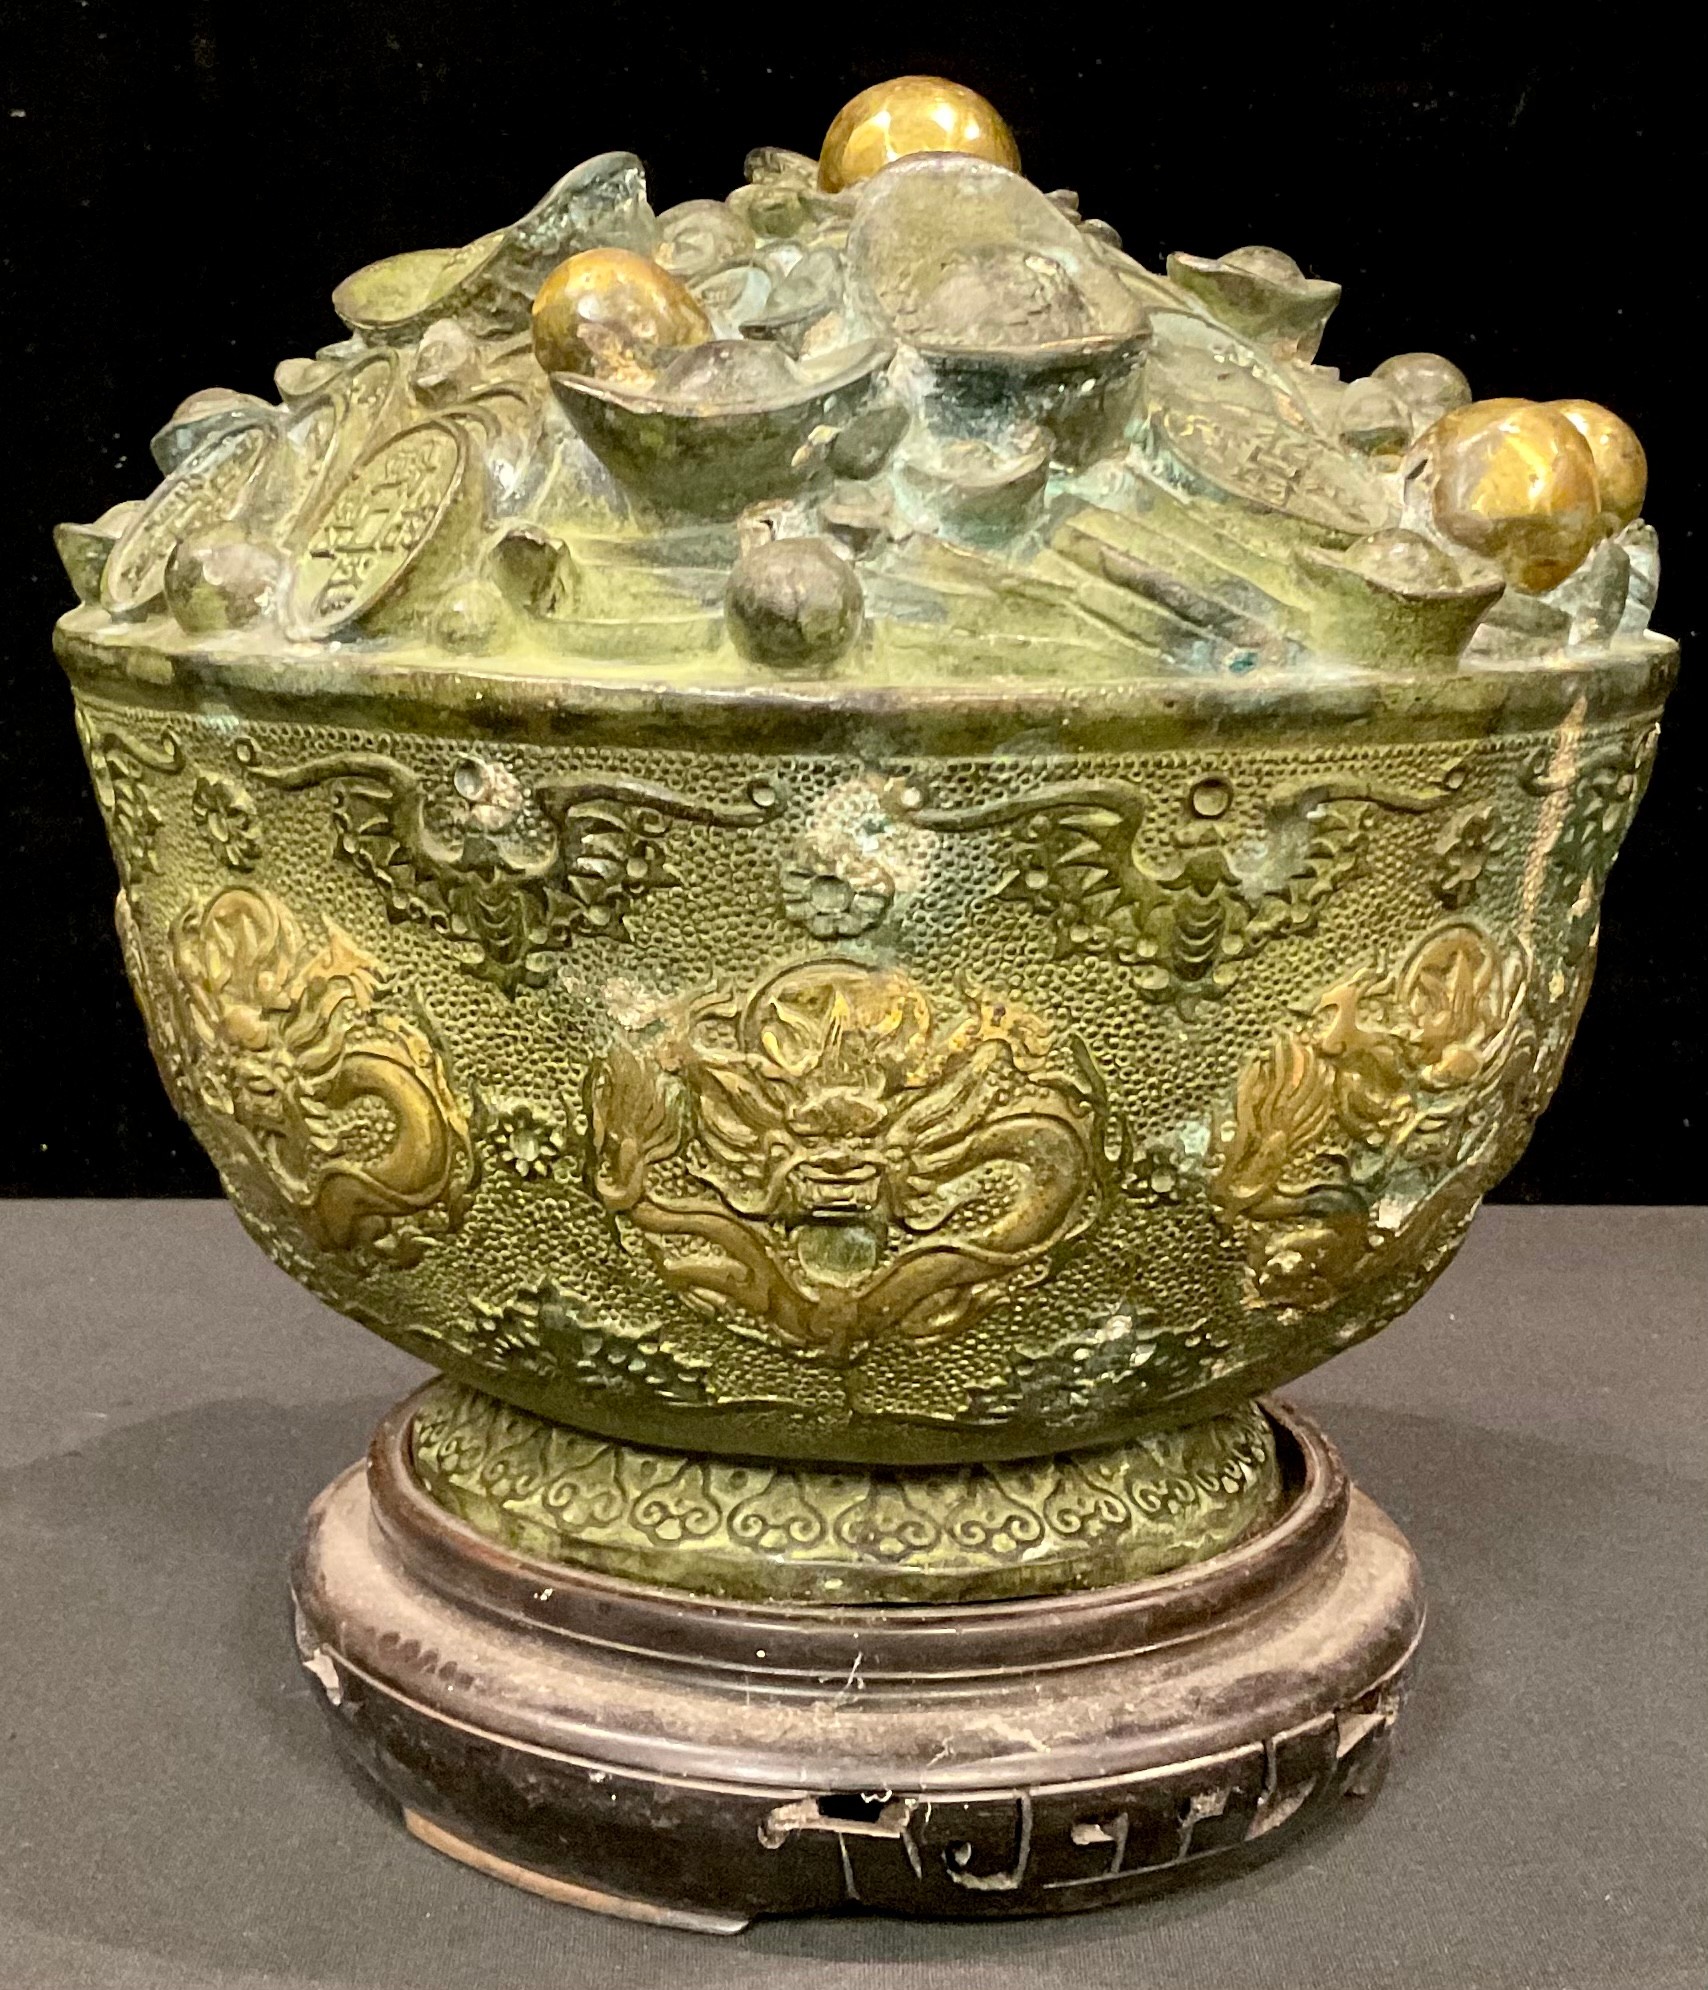 A Chinese bronzed metal fortune or treasure bowl, decorated with dragons and bats, on hardwood - Image 2 of 3